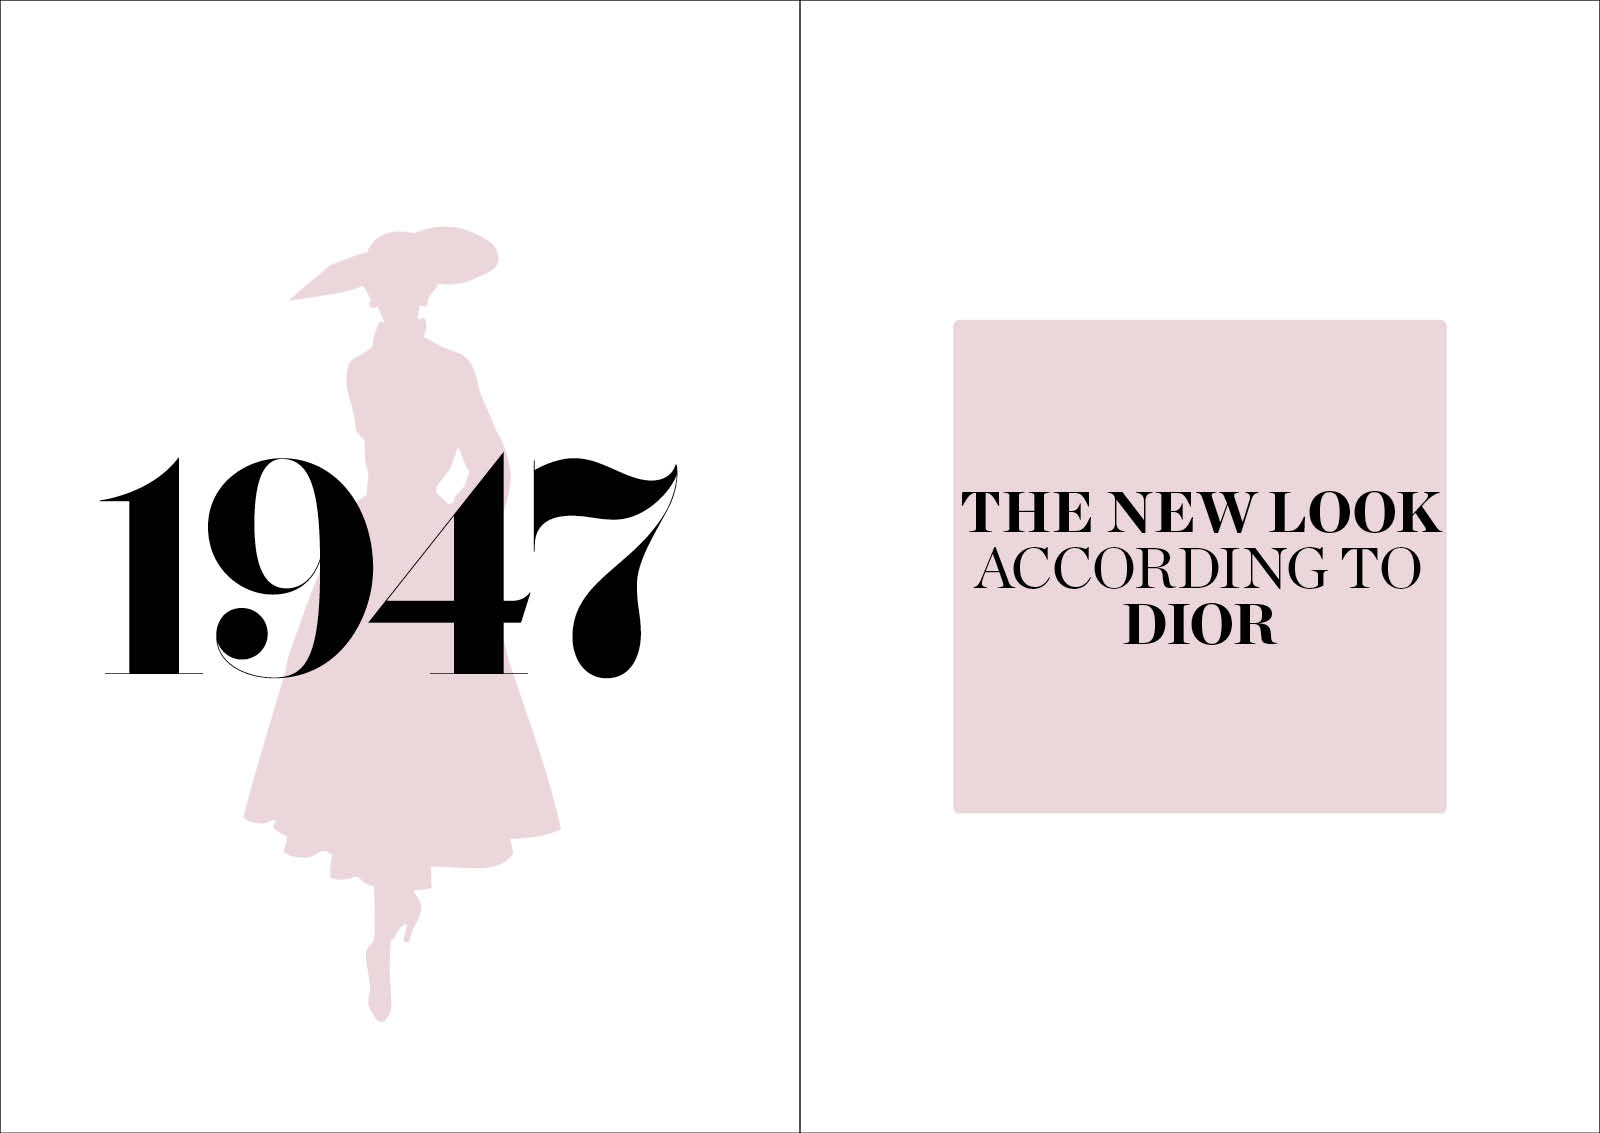 MORE THAN JUST THE NEW LOOK- CHRISTIAN DIOR: DESIGNER OF DREAMS